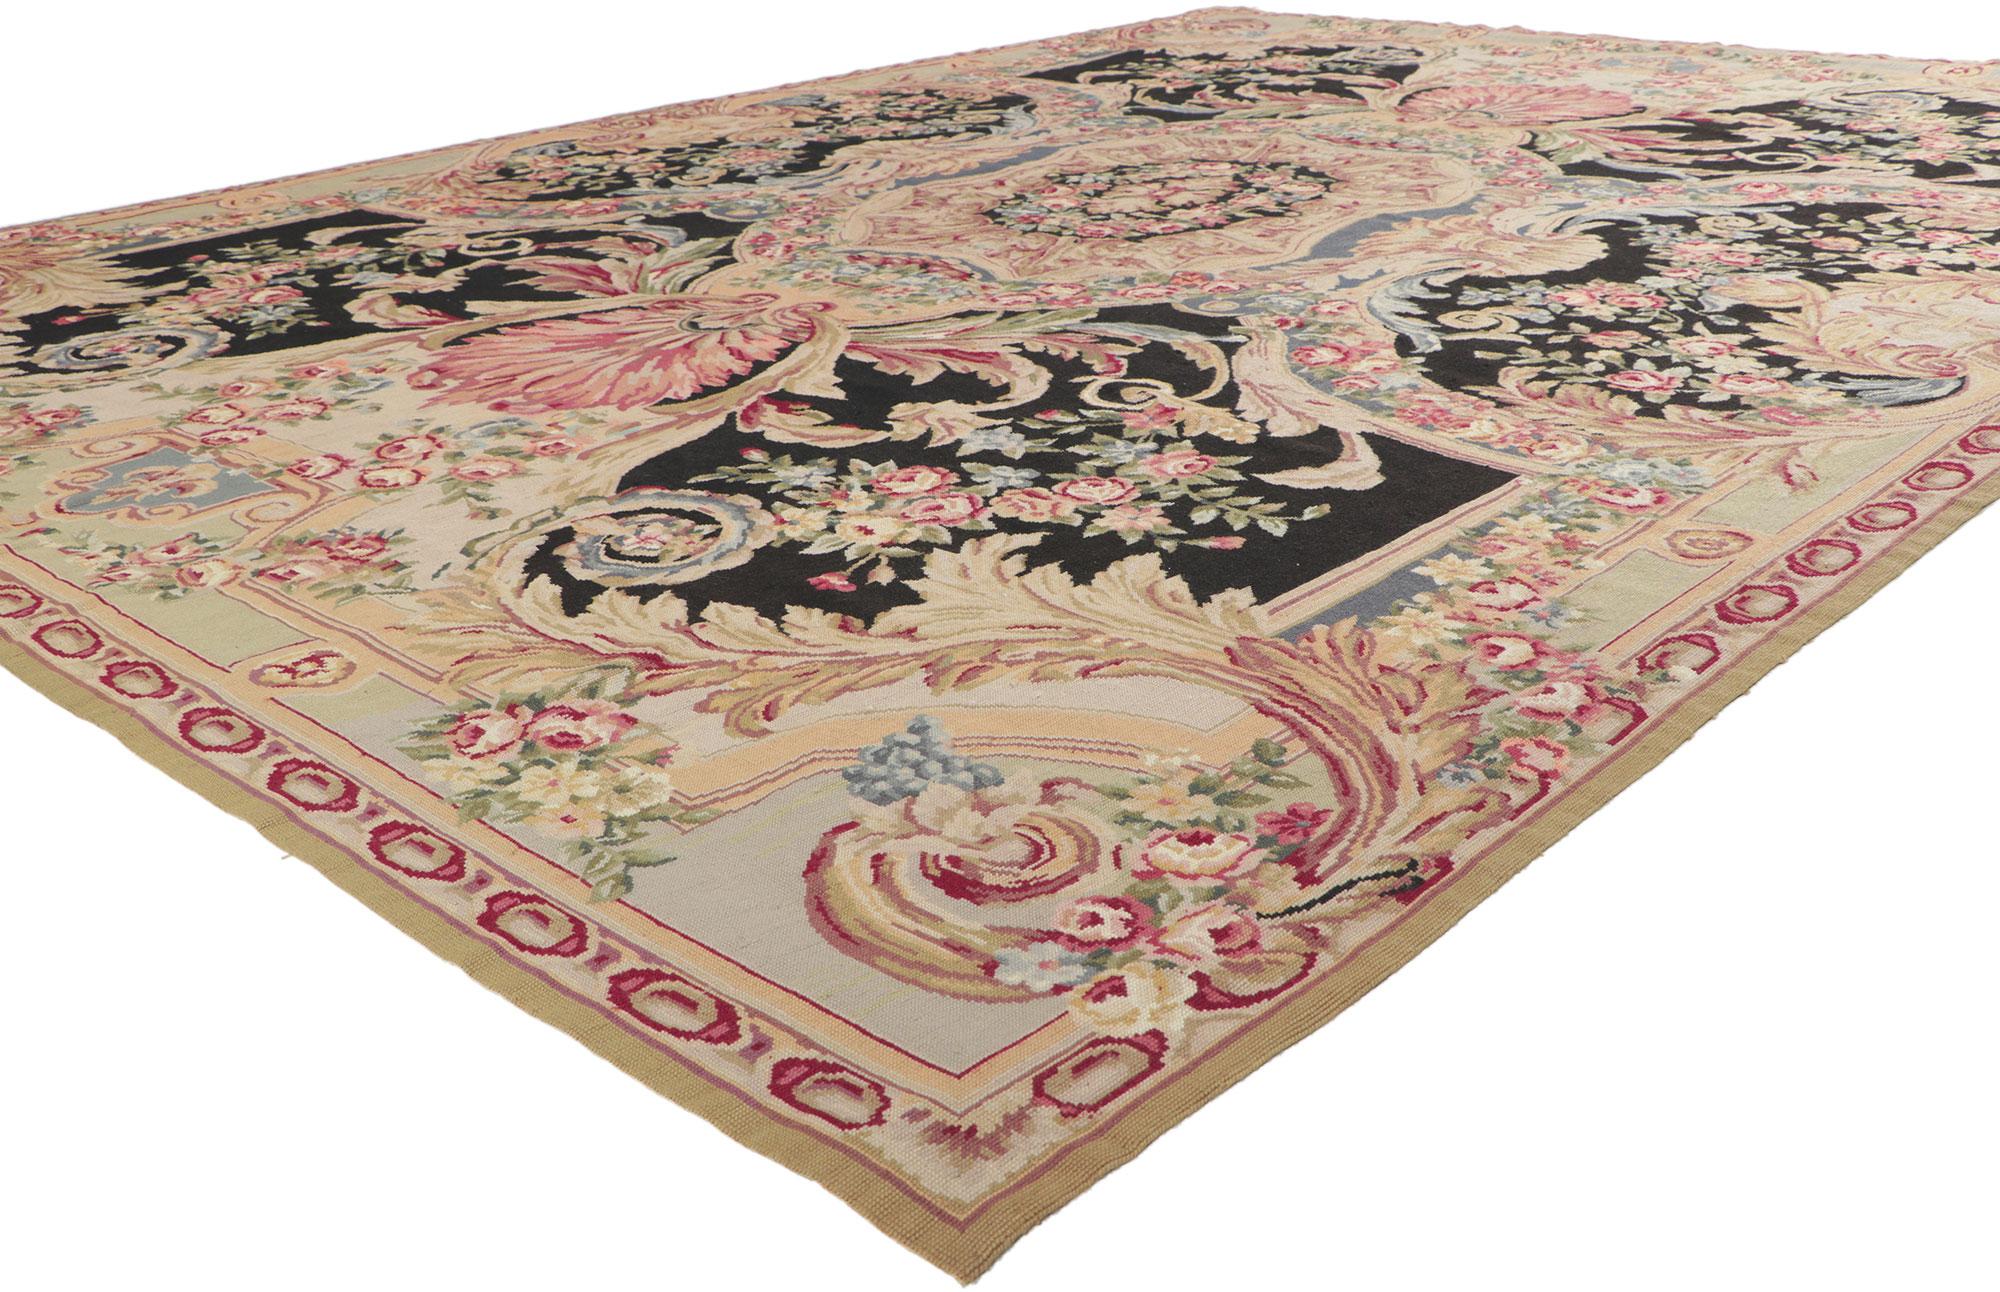 78359 Vintage French Savonnerie Style Rug Inspired by Louis XIV 08'05 x 11'07. No shrinking violets here. With its magnificiently elaborate details and decadent beauty, this vintage French Savonnerie style rug is a captivating vision of woven